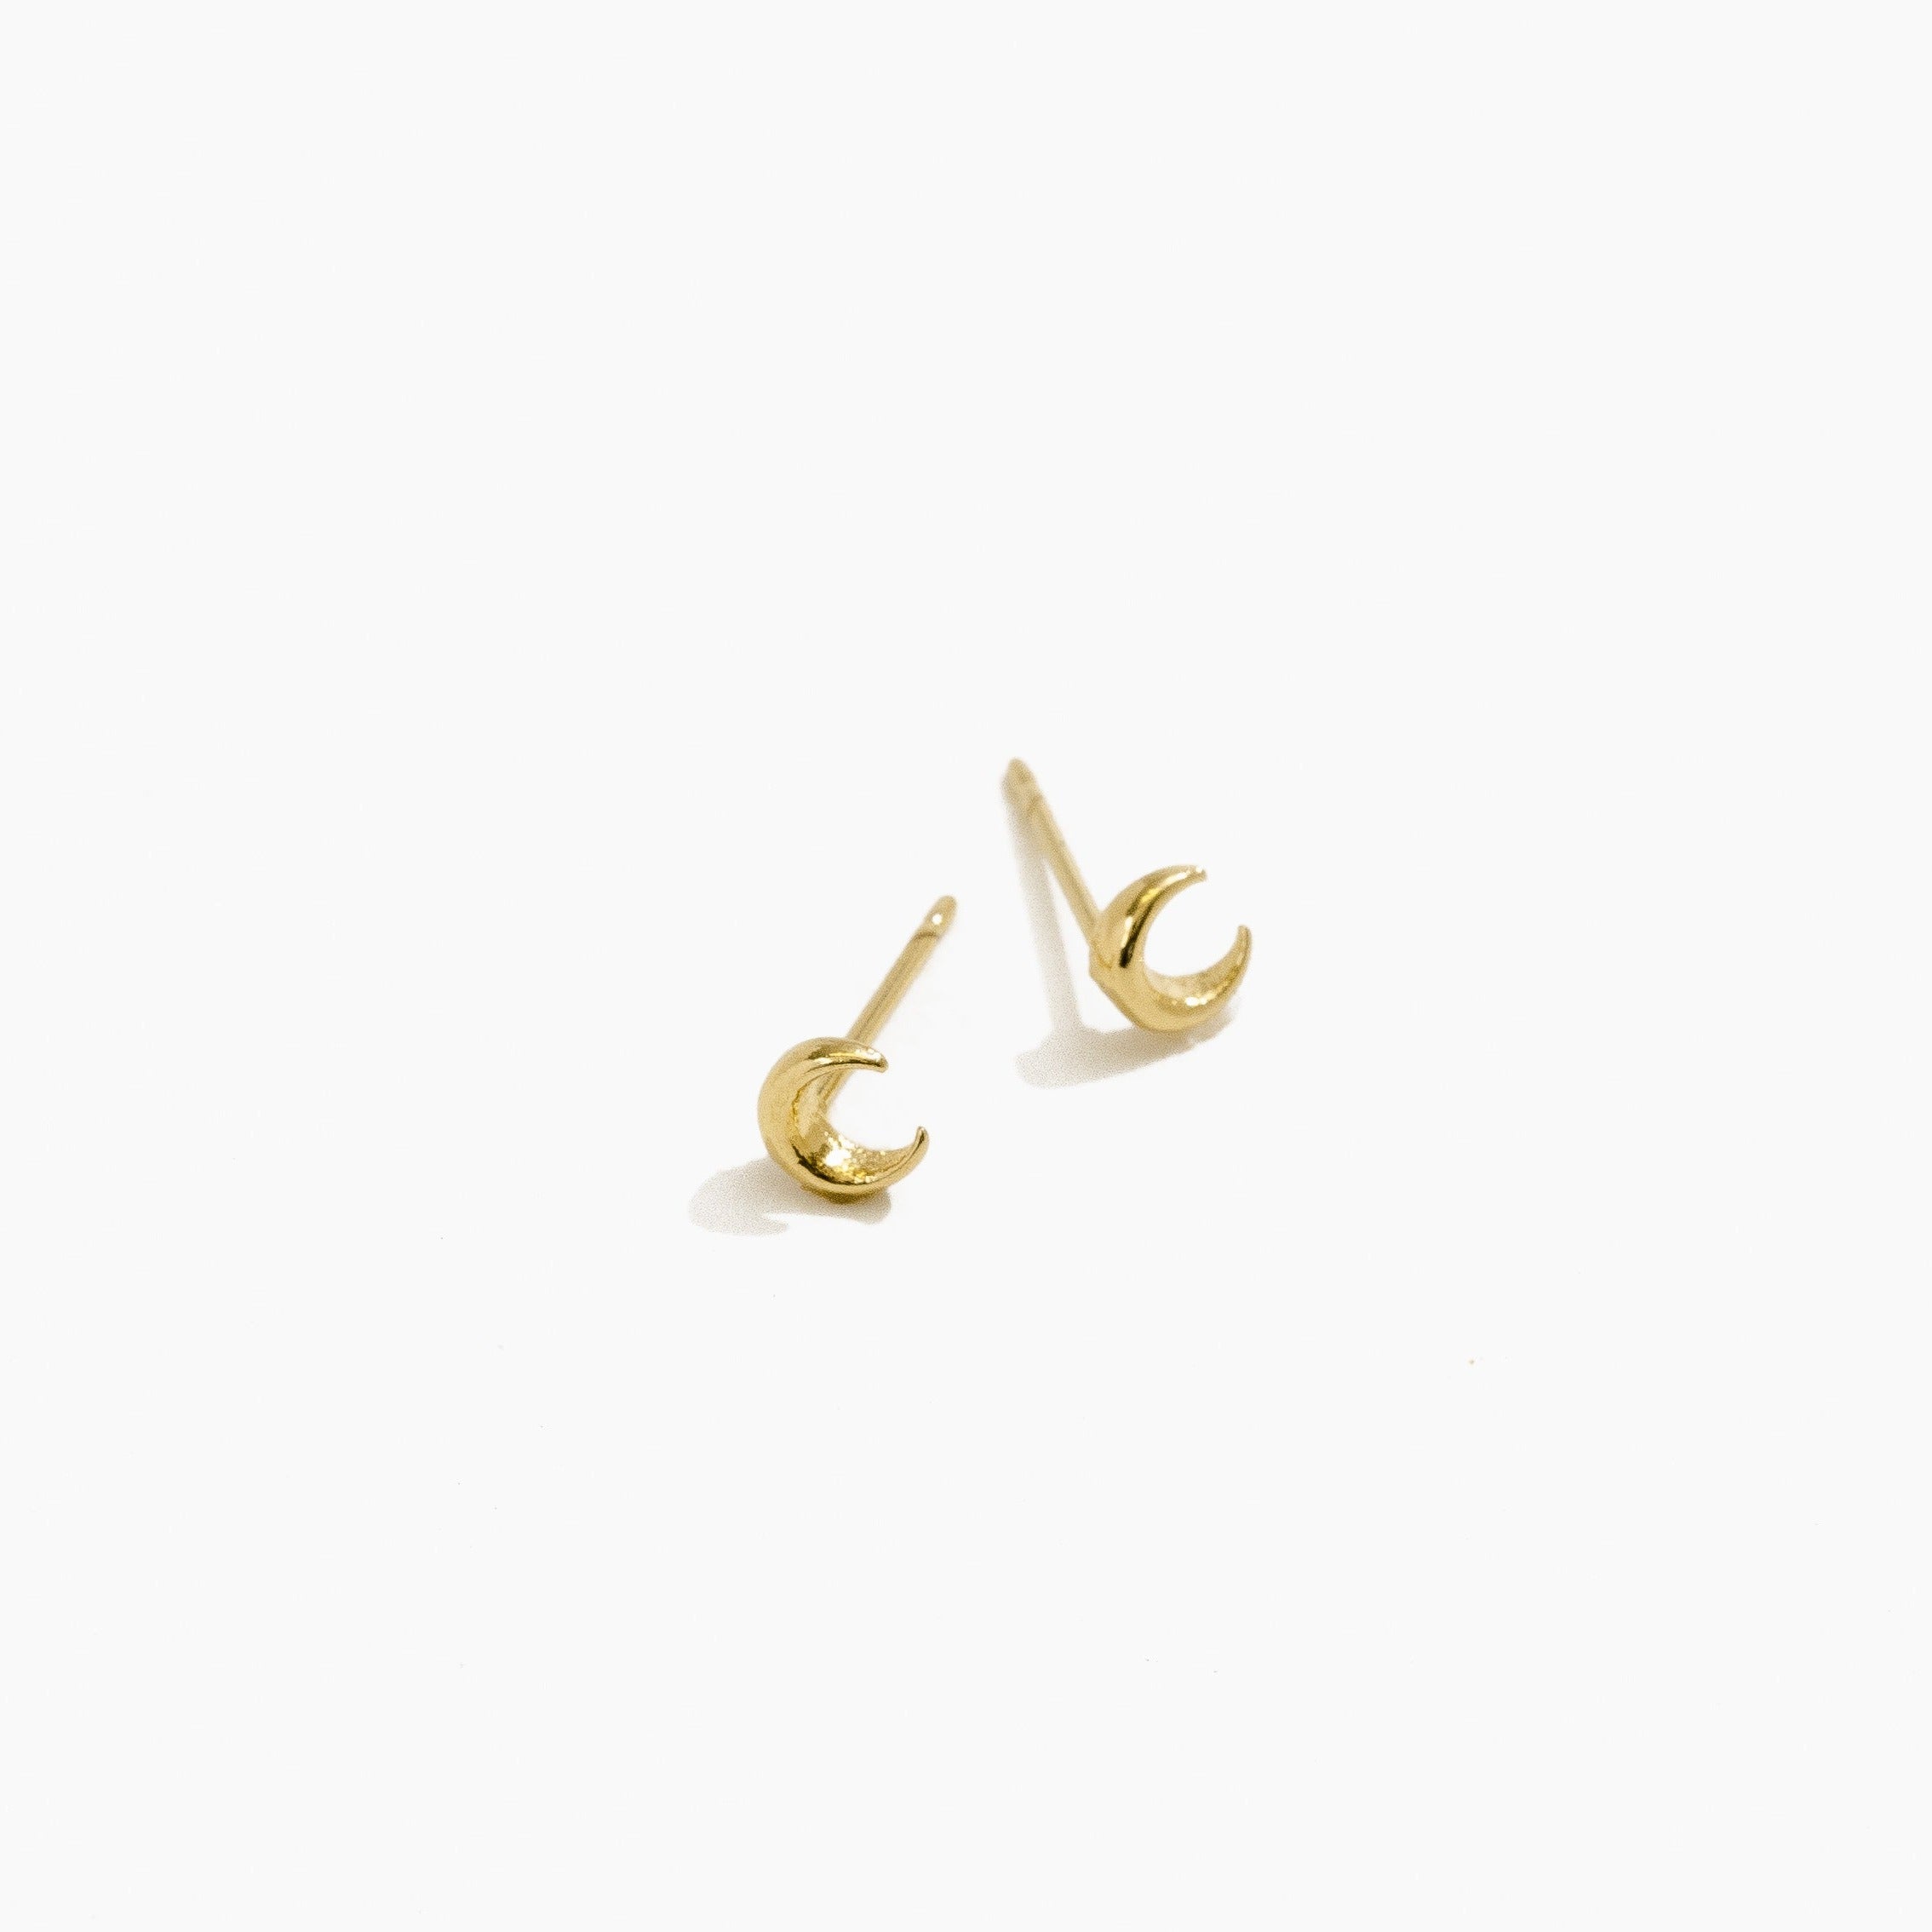 Moon Studs by Katie Dean Jewelry, made in America, hypoallergenic